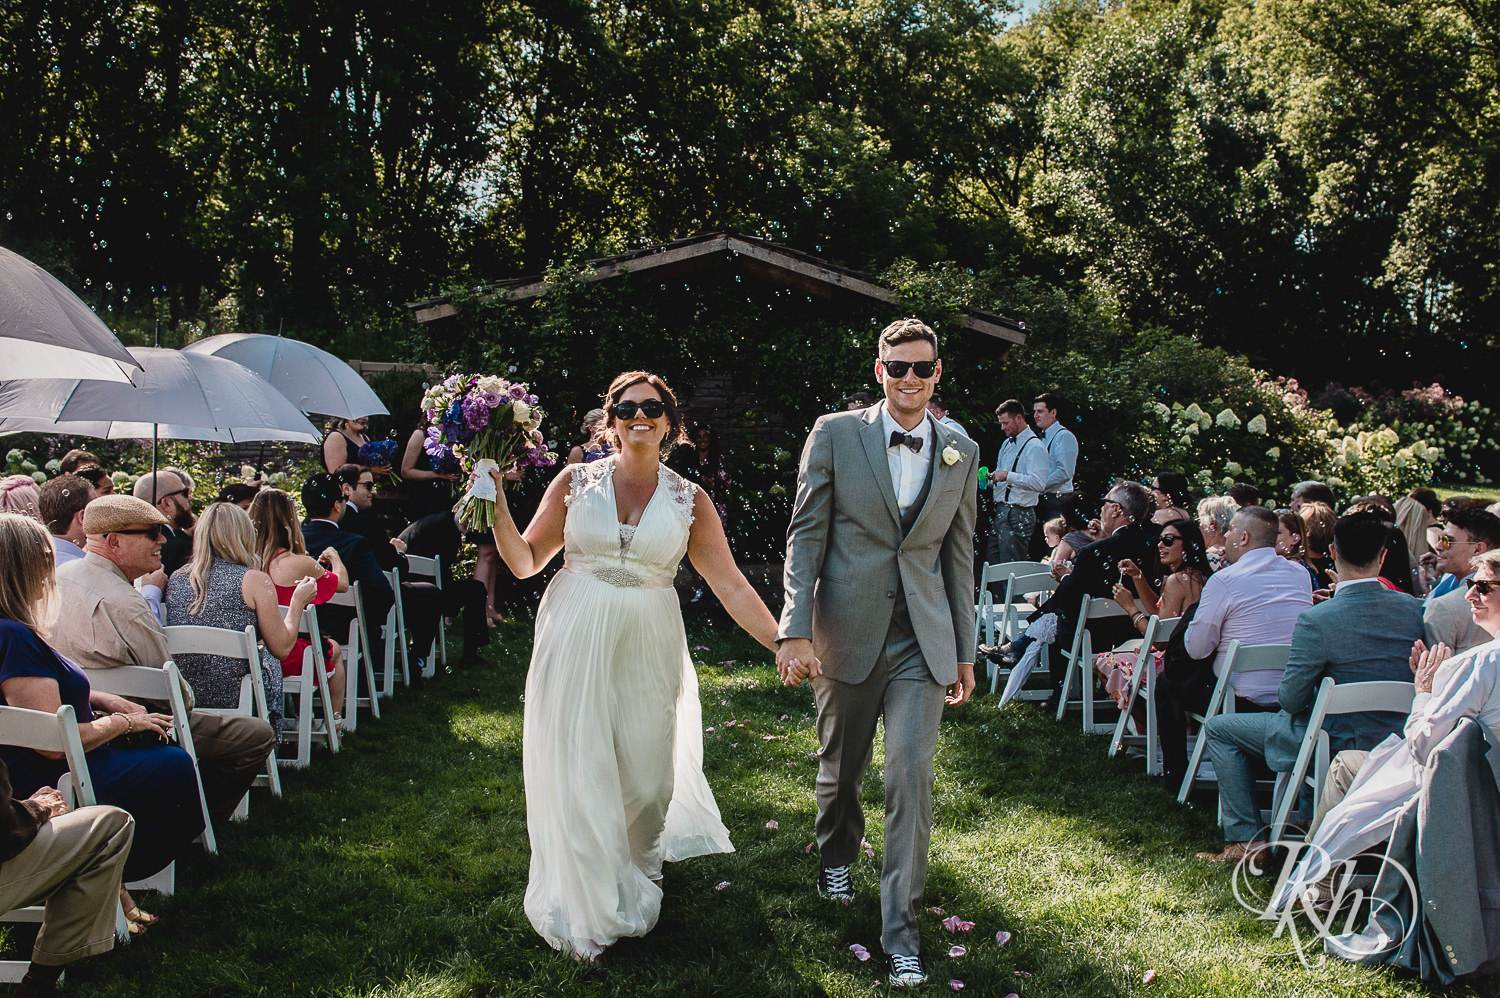 Bride and groom walk down the aisle after wedding ceremony in sunglasses at Camrose Hill Flower Farm in Stillwater, Minnesota.